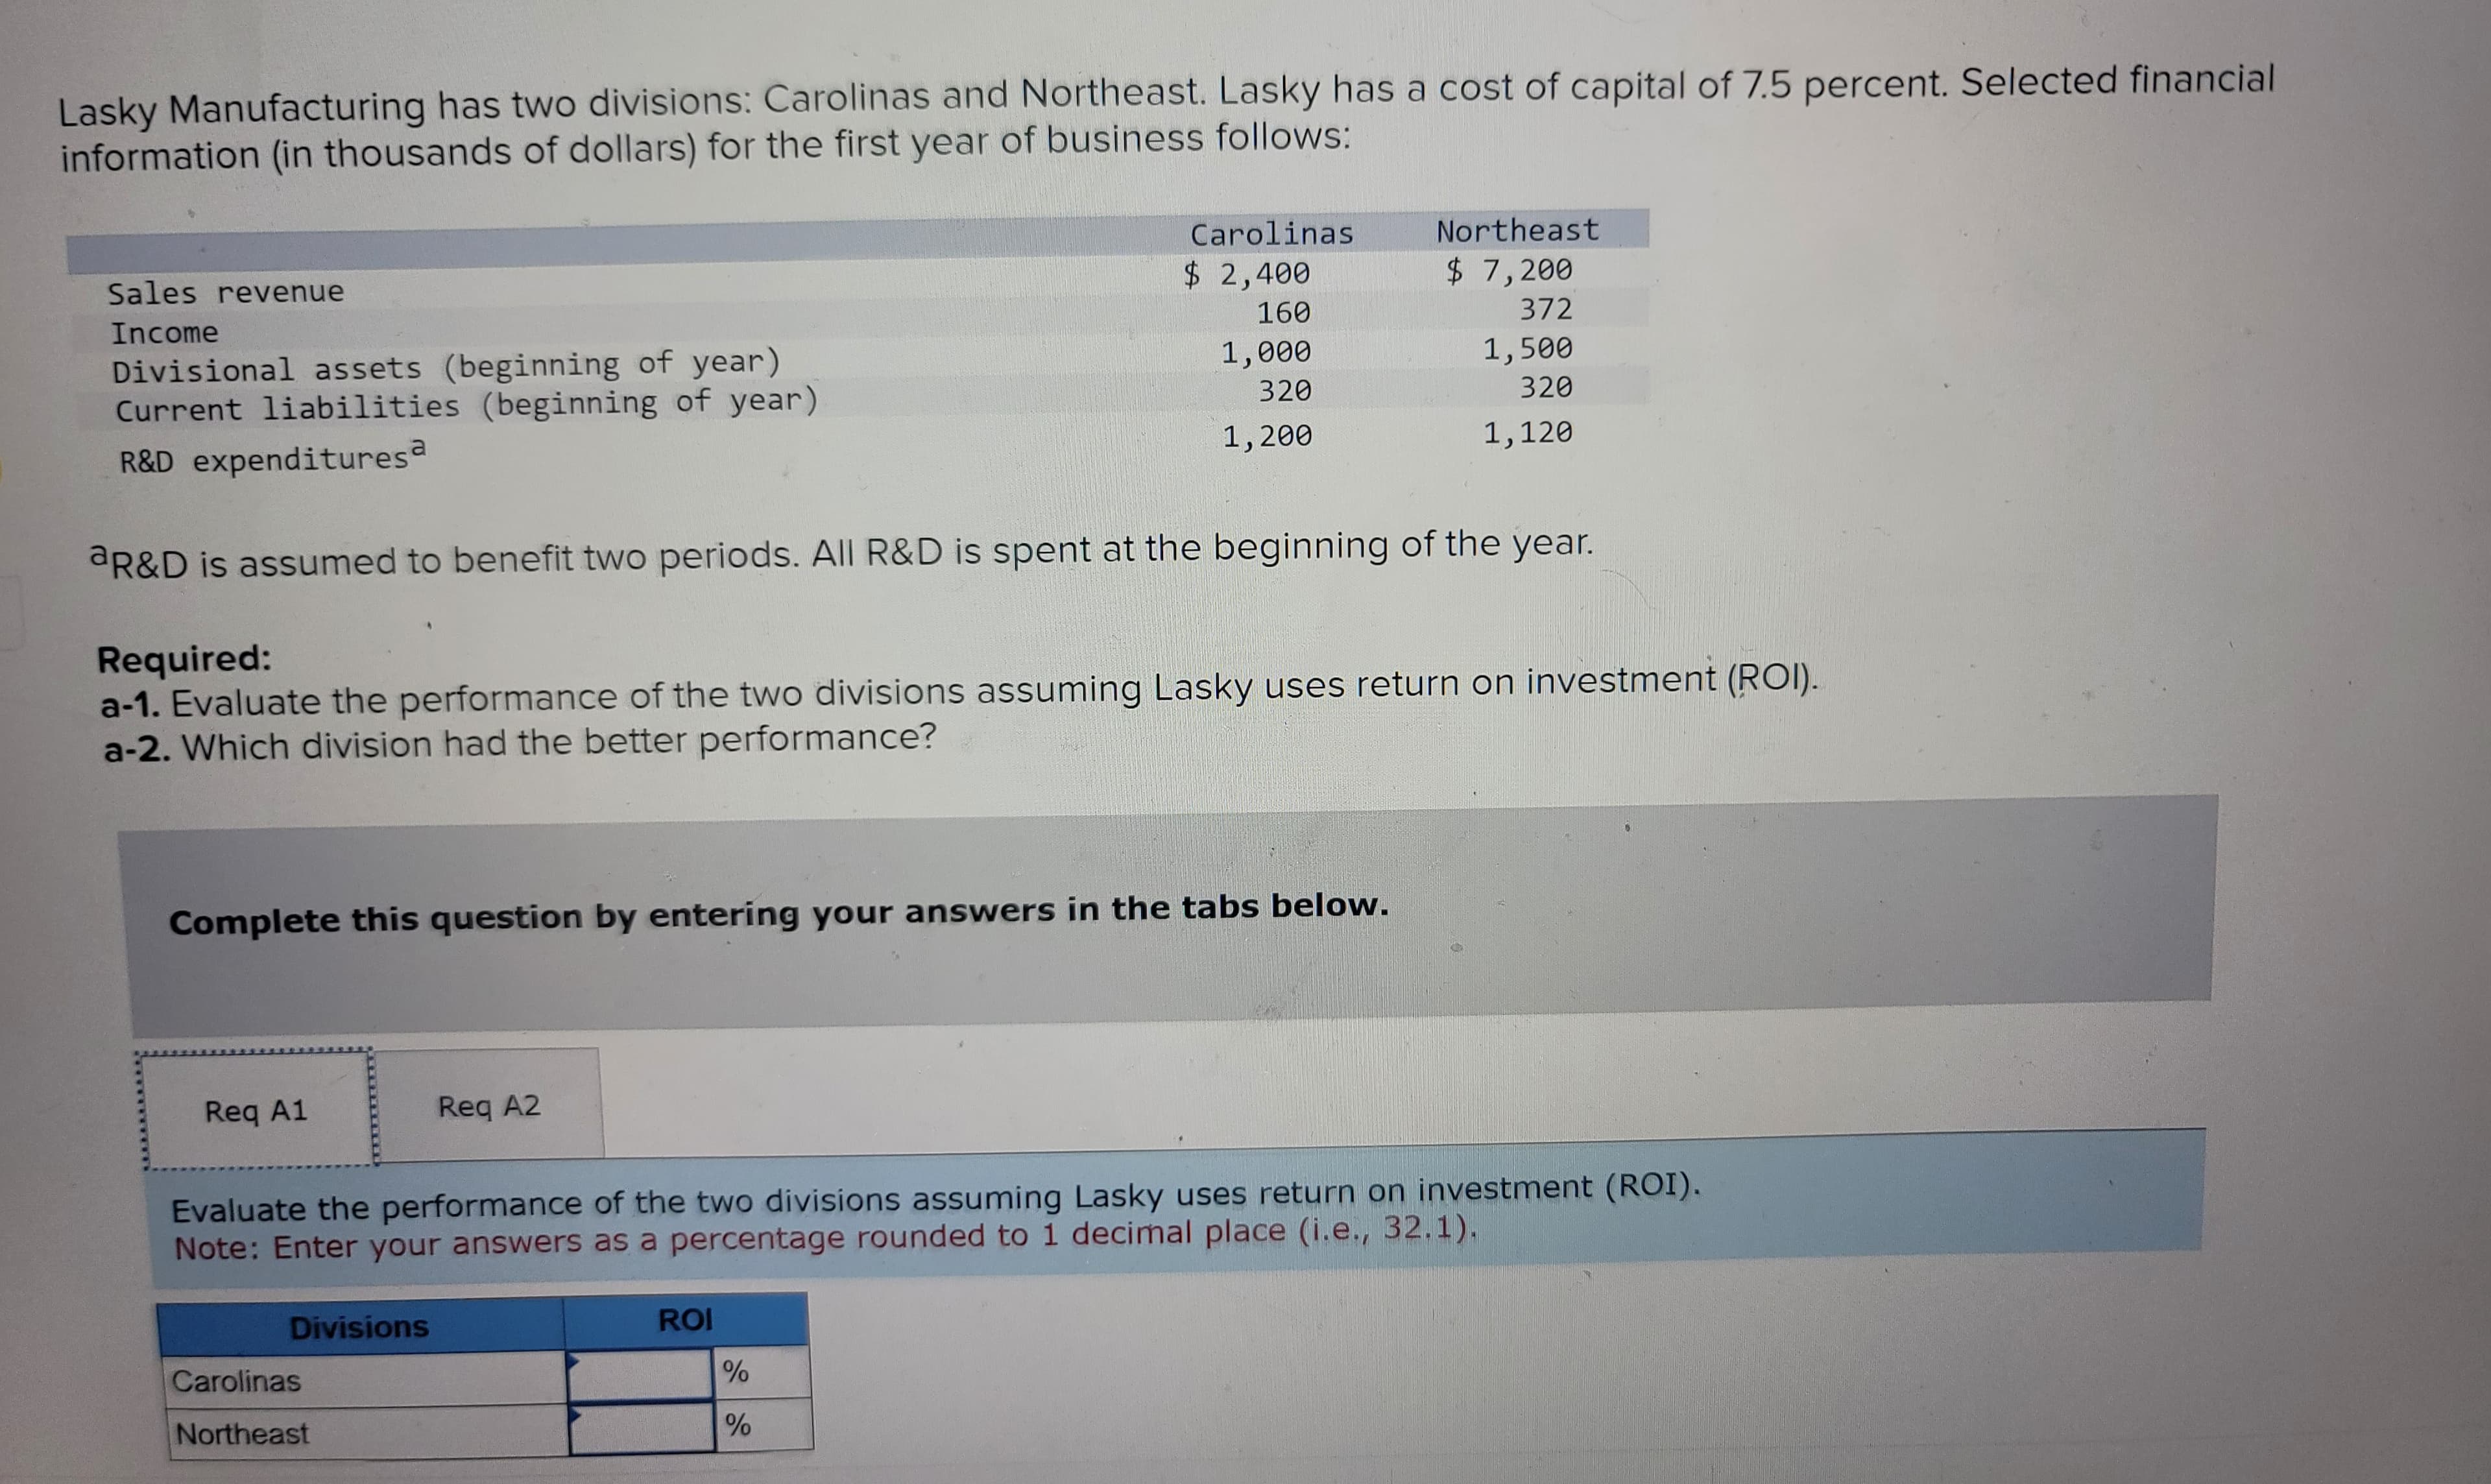 Lasky Manufacturing has two divisions: Carolinas and Northeast. Lasky has a cost of capital of 7.5 percent. Selected financial
information (in thousands of dollars) for the first year of business follows:
Sales revenue
Income
Divisional assets (beginning of year)
Current liabilities (beginning of year)
R&D expendituresa
aR&D is assumed to benefit two periods. All R&D is spent at the beginning of the year.
Required:
a-1. Evaluate the performance of the two divisions assuming Lasky uses return on investment (ROI).
a-2. Which division had the better performance?
Complete this question by entering your answers in the tabs below.
Req A1
Divisions
Carolinas
$2,400
160
1,000
320
1,200
Req A2
Carolinas
Northeast
Evaluate the performance of the two divisions assuming Lasky uses return on investment (ROI).
Note: Enter your answers as a percentage rounded to 1 decimal place (i.e., 32.1).
Northeast
$ 7,200
372
1,500
320
1,120
ROI
%
%